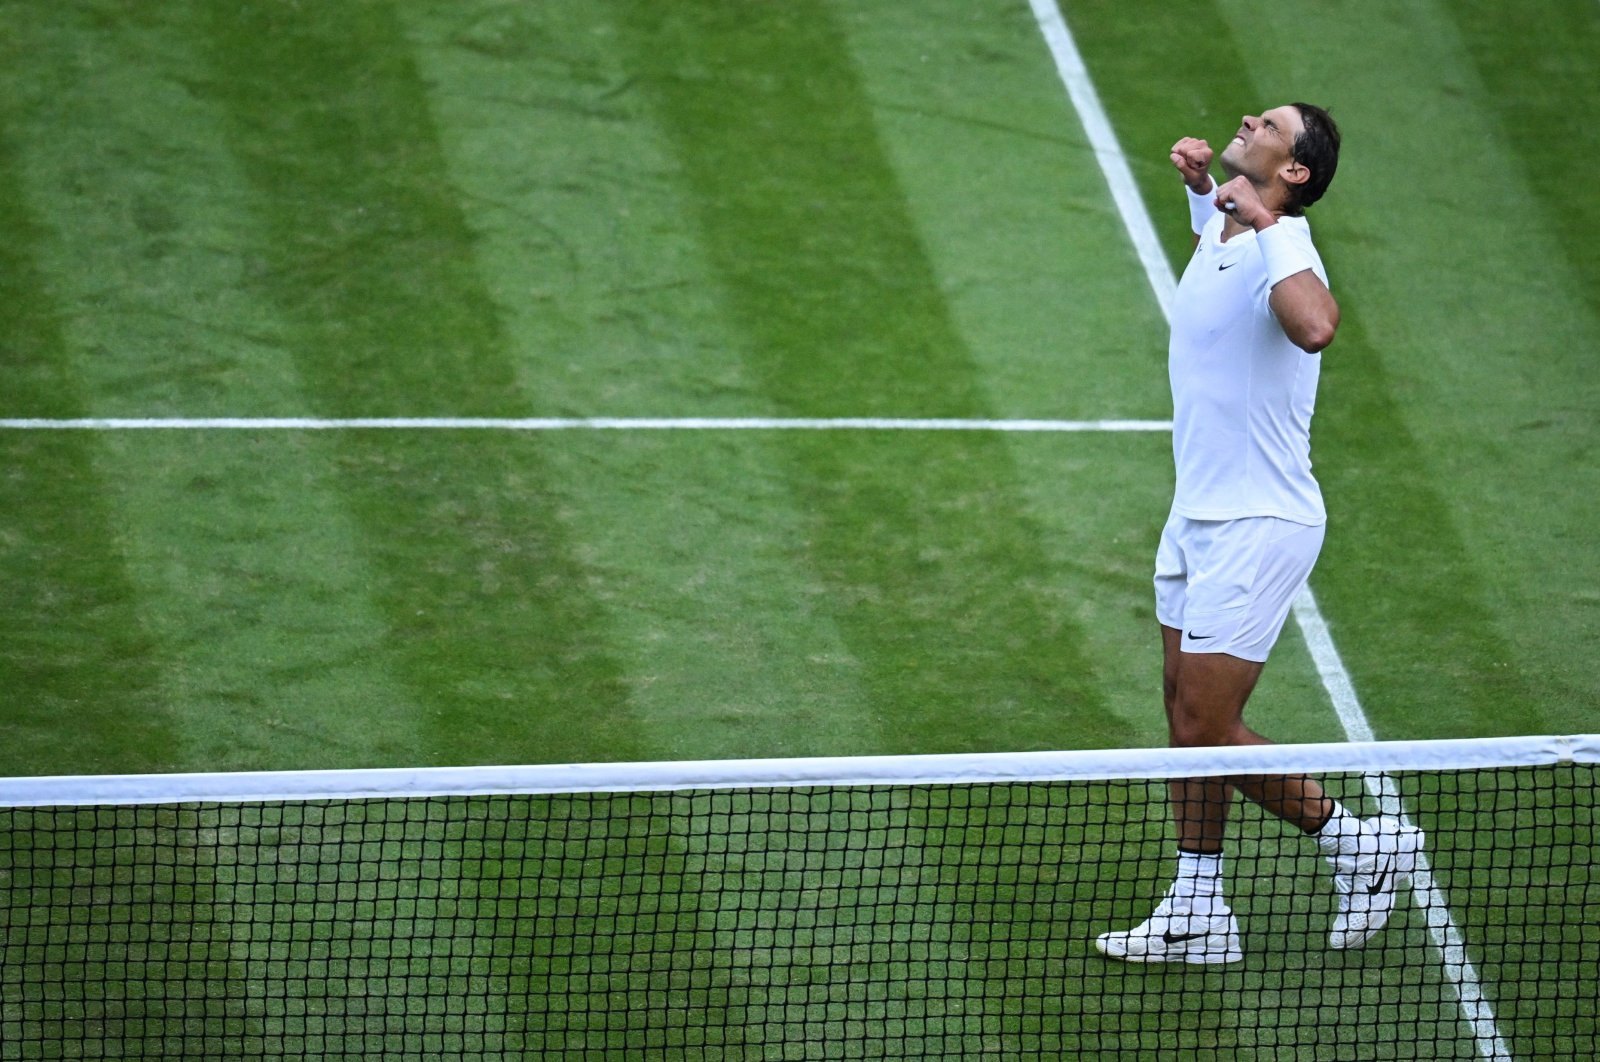 Spain&#039;s Rafael Nadal celebrates beating Netherlands&#039; Botic Van De Zandschulp during their round of 16 men&#039;s singles tennis match on the eighth day of the 2022 Wimbledon Championships at The All England Tennis Club in Wimbledon, southwest London, July 4, 2022. (AFP Photo)